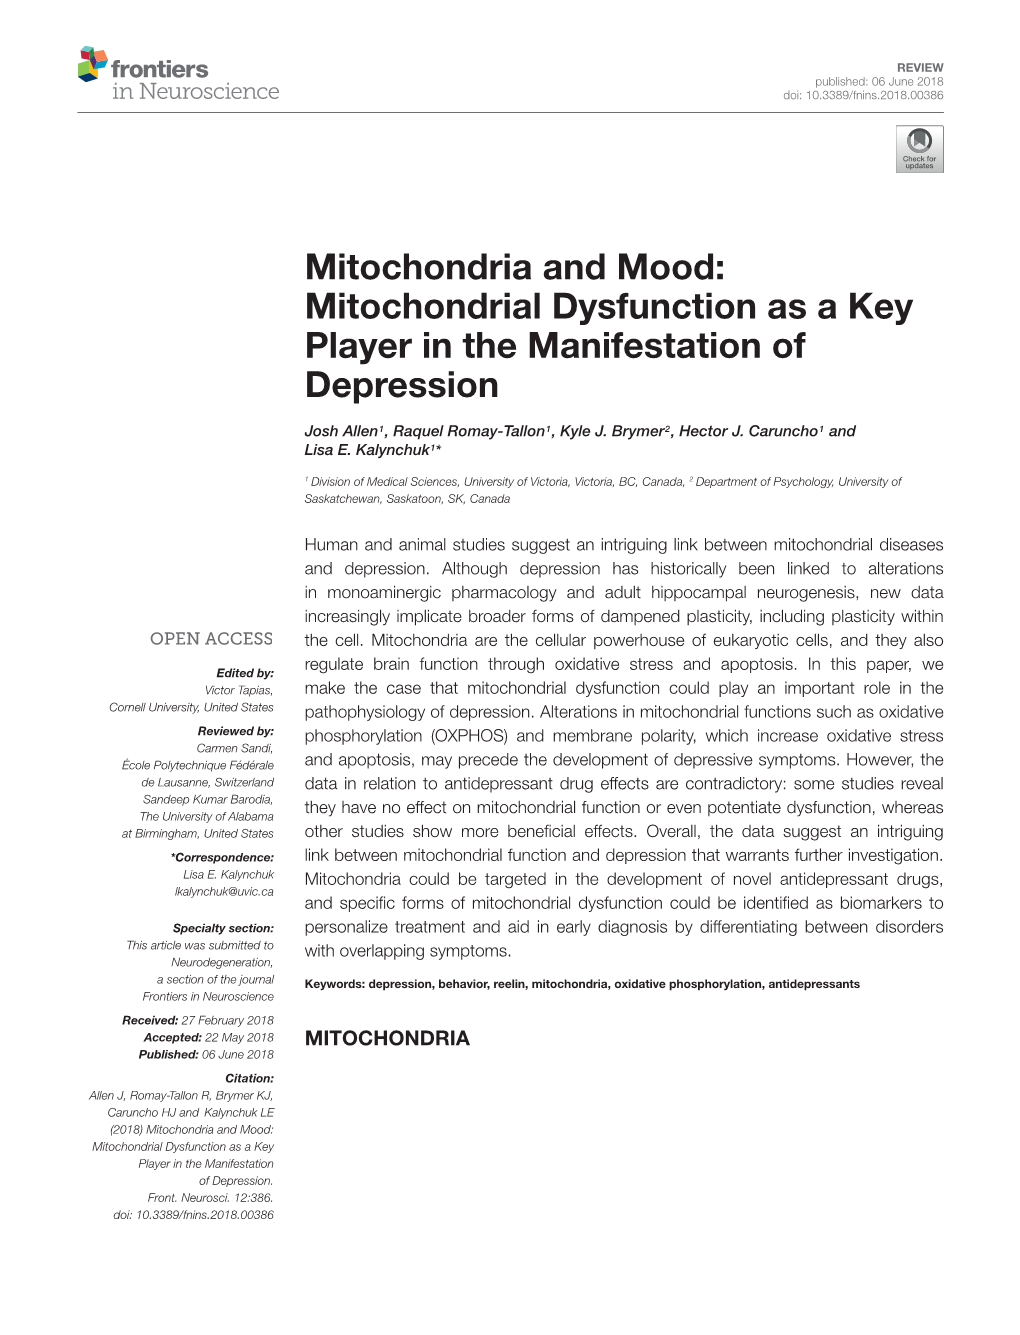 Mitochondria and Mood: Mitochondrial Dysfunction As a Key Player in the Manifestation of Depression